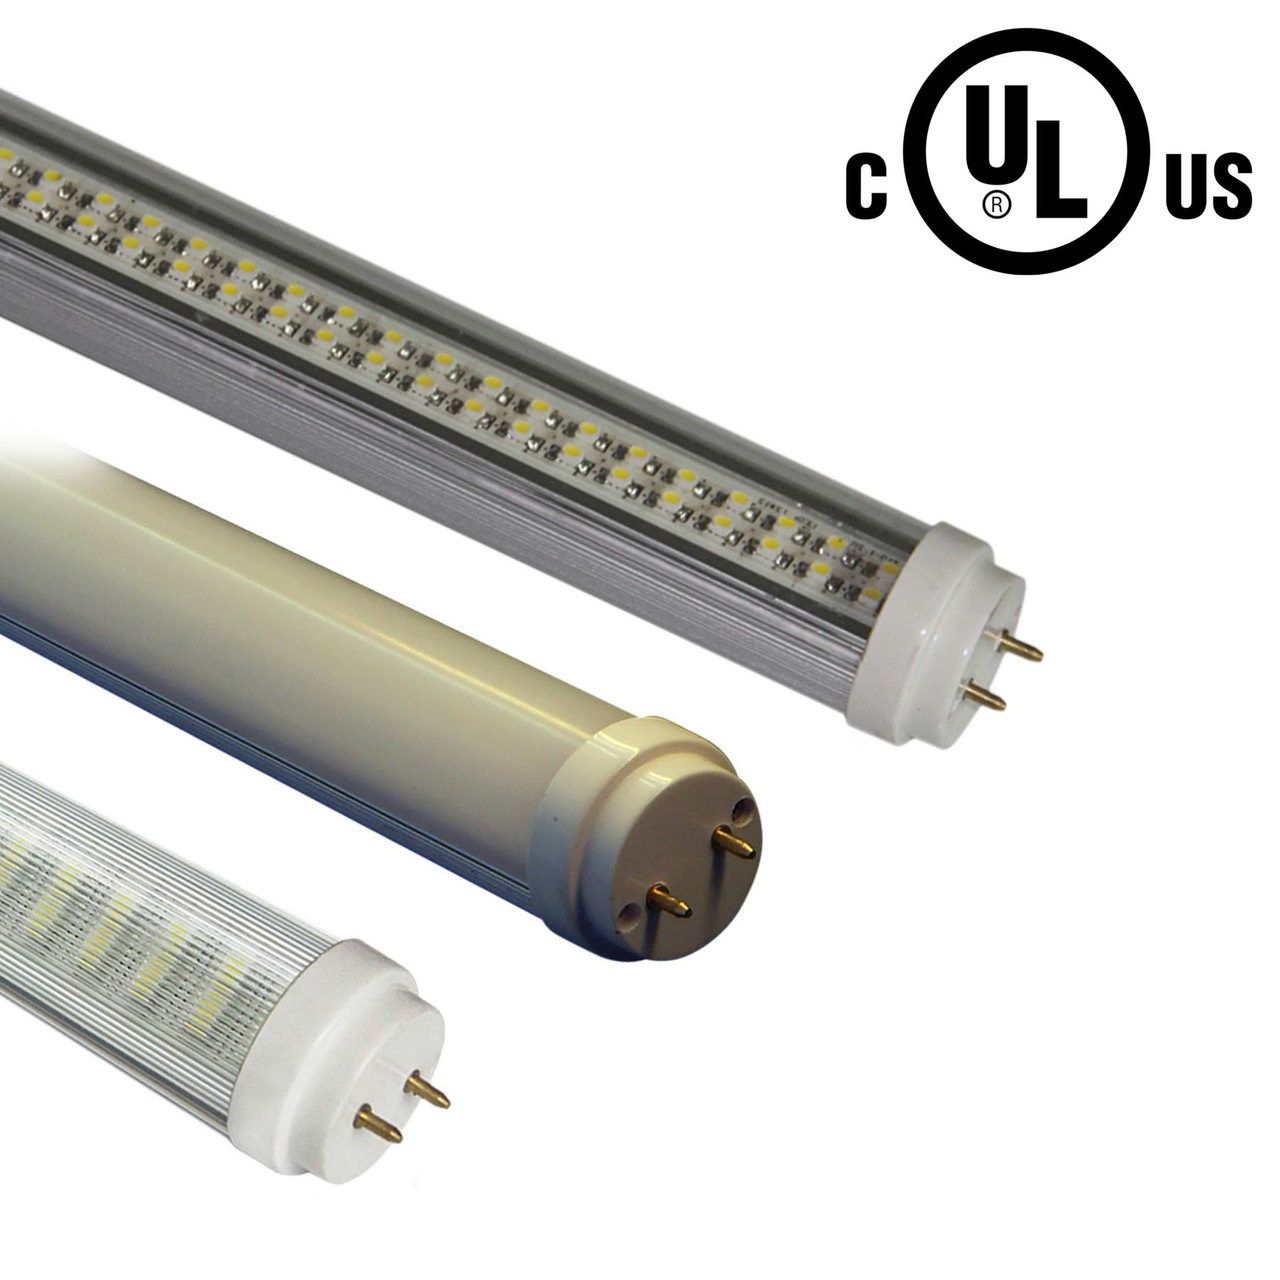 https://www.led-professional.com/project_news/lamps-luminaires/t10-led-tube-lamp-from-signcomplex/@@download/image/T10.jpg